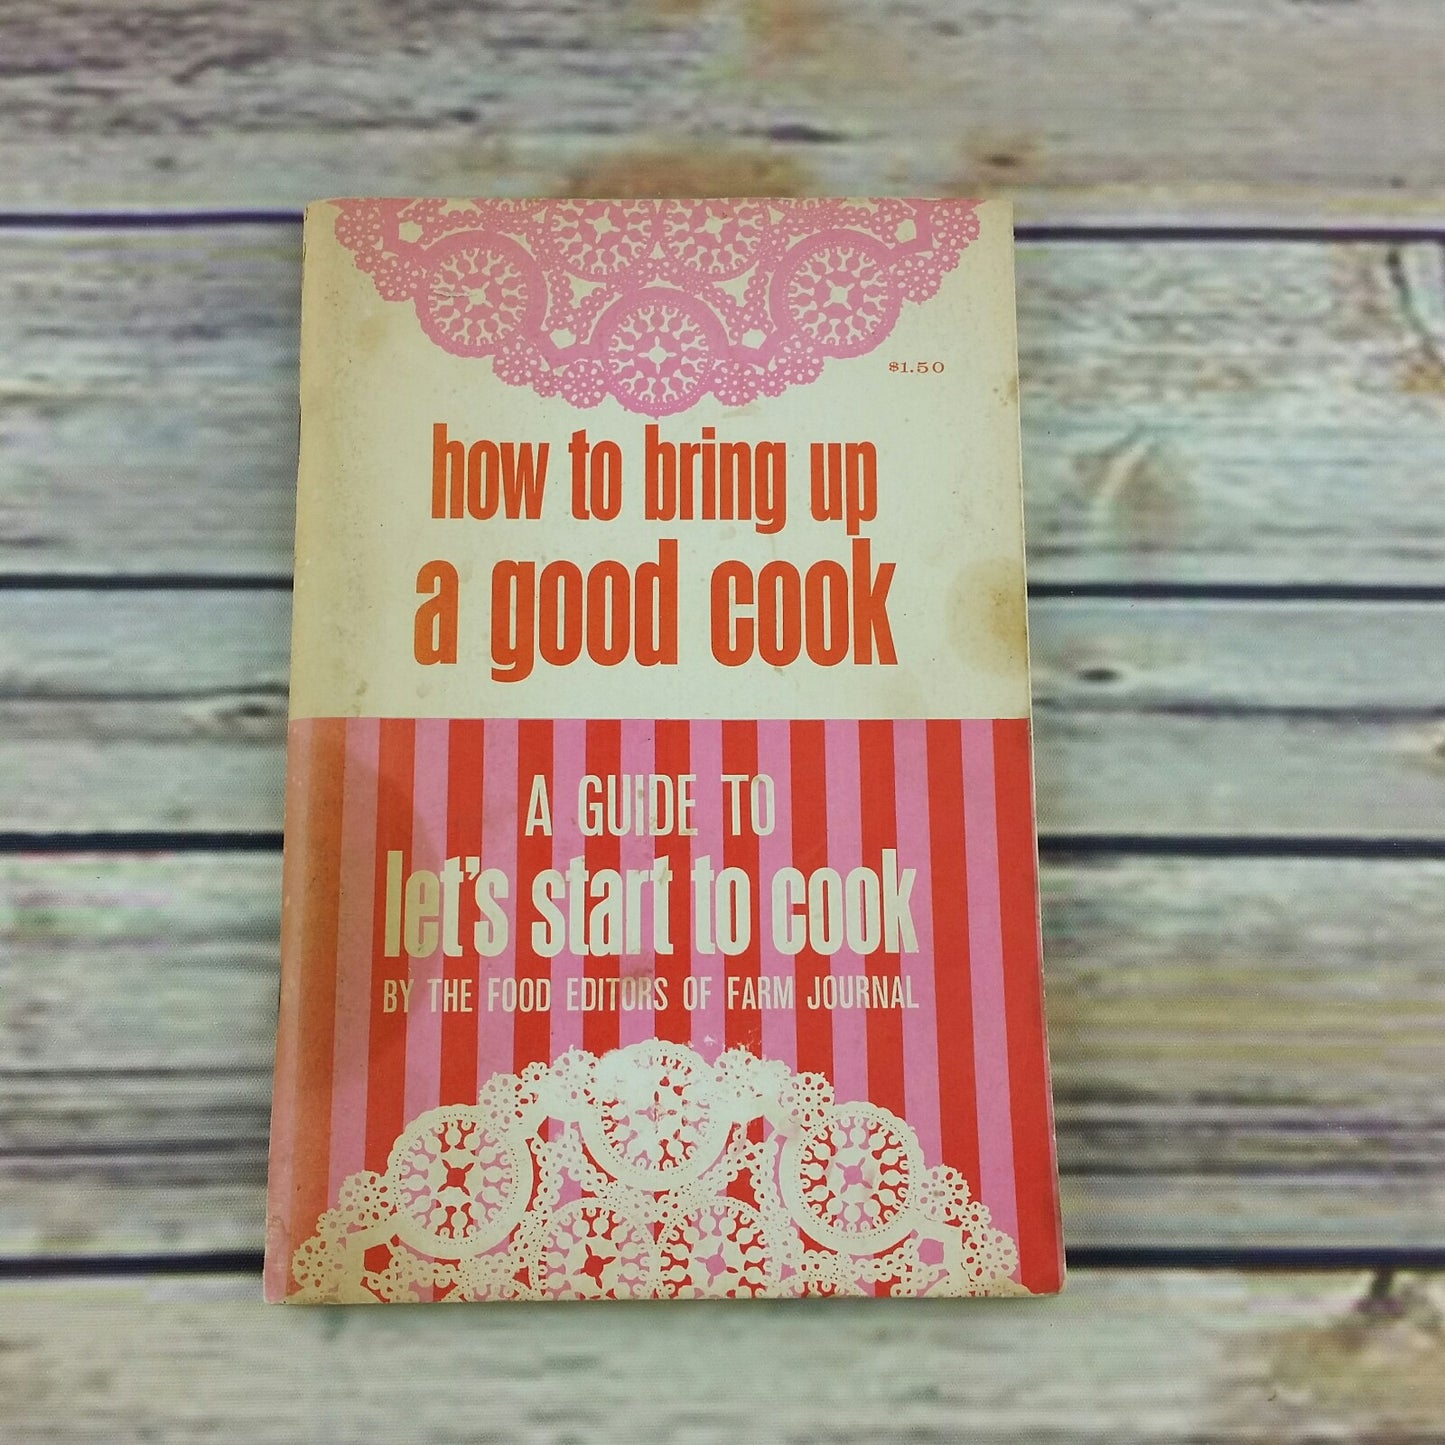 Vintage Cookbook How To Bring Up a Good Cook Farm Journal Food Editors 1966 Booklet - At Grandma's Table